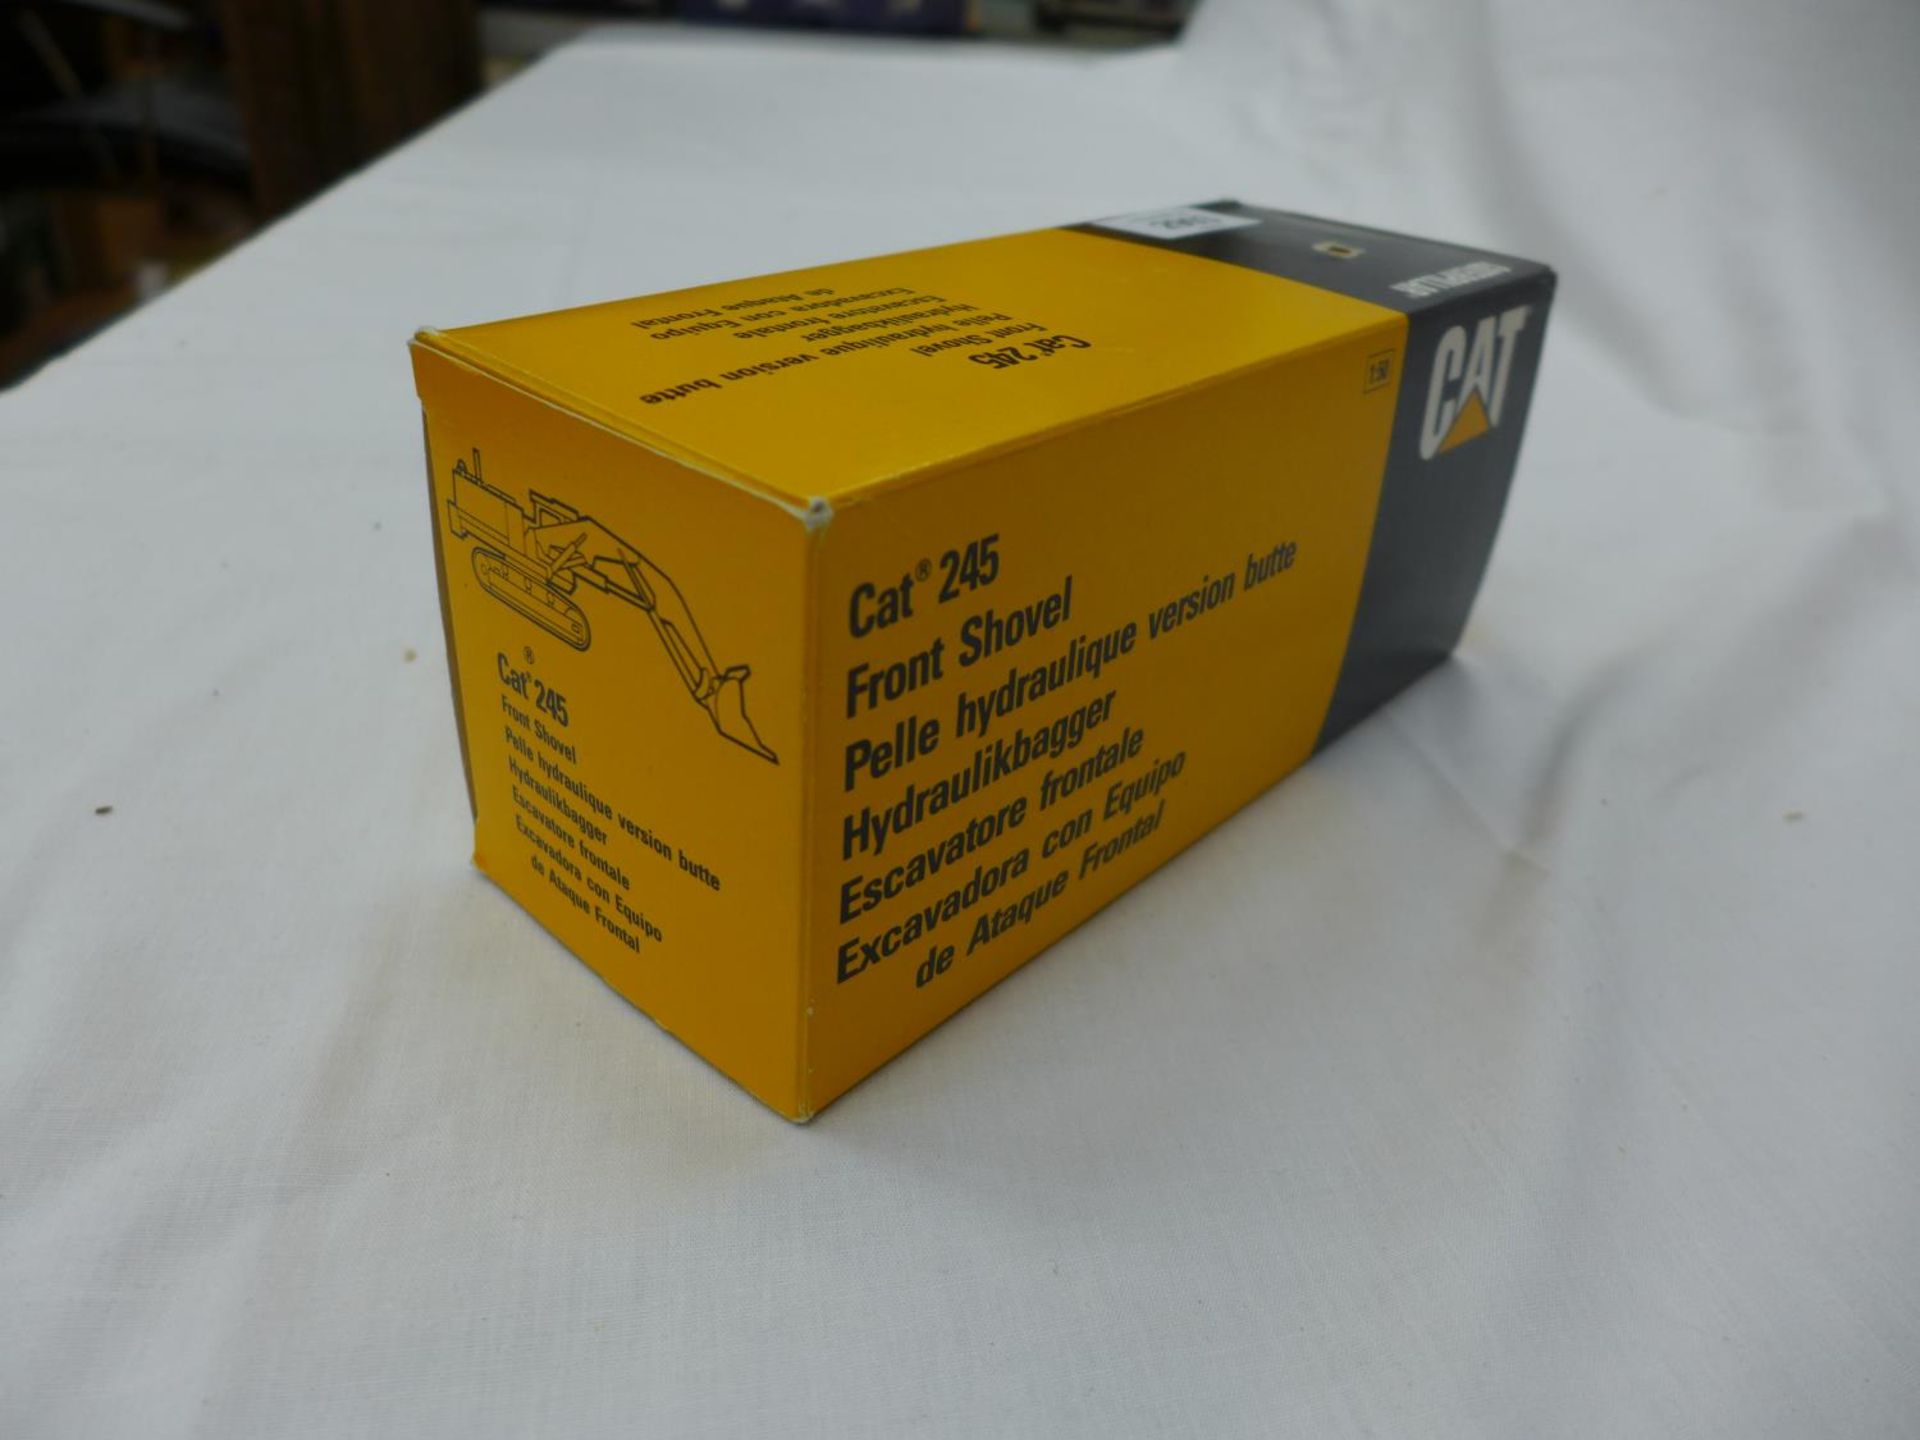 A BOXED NGZ CAT 245 MODEL EXCAVATOR NUMBER 177 - Image 3 of 3